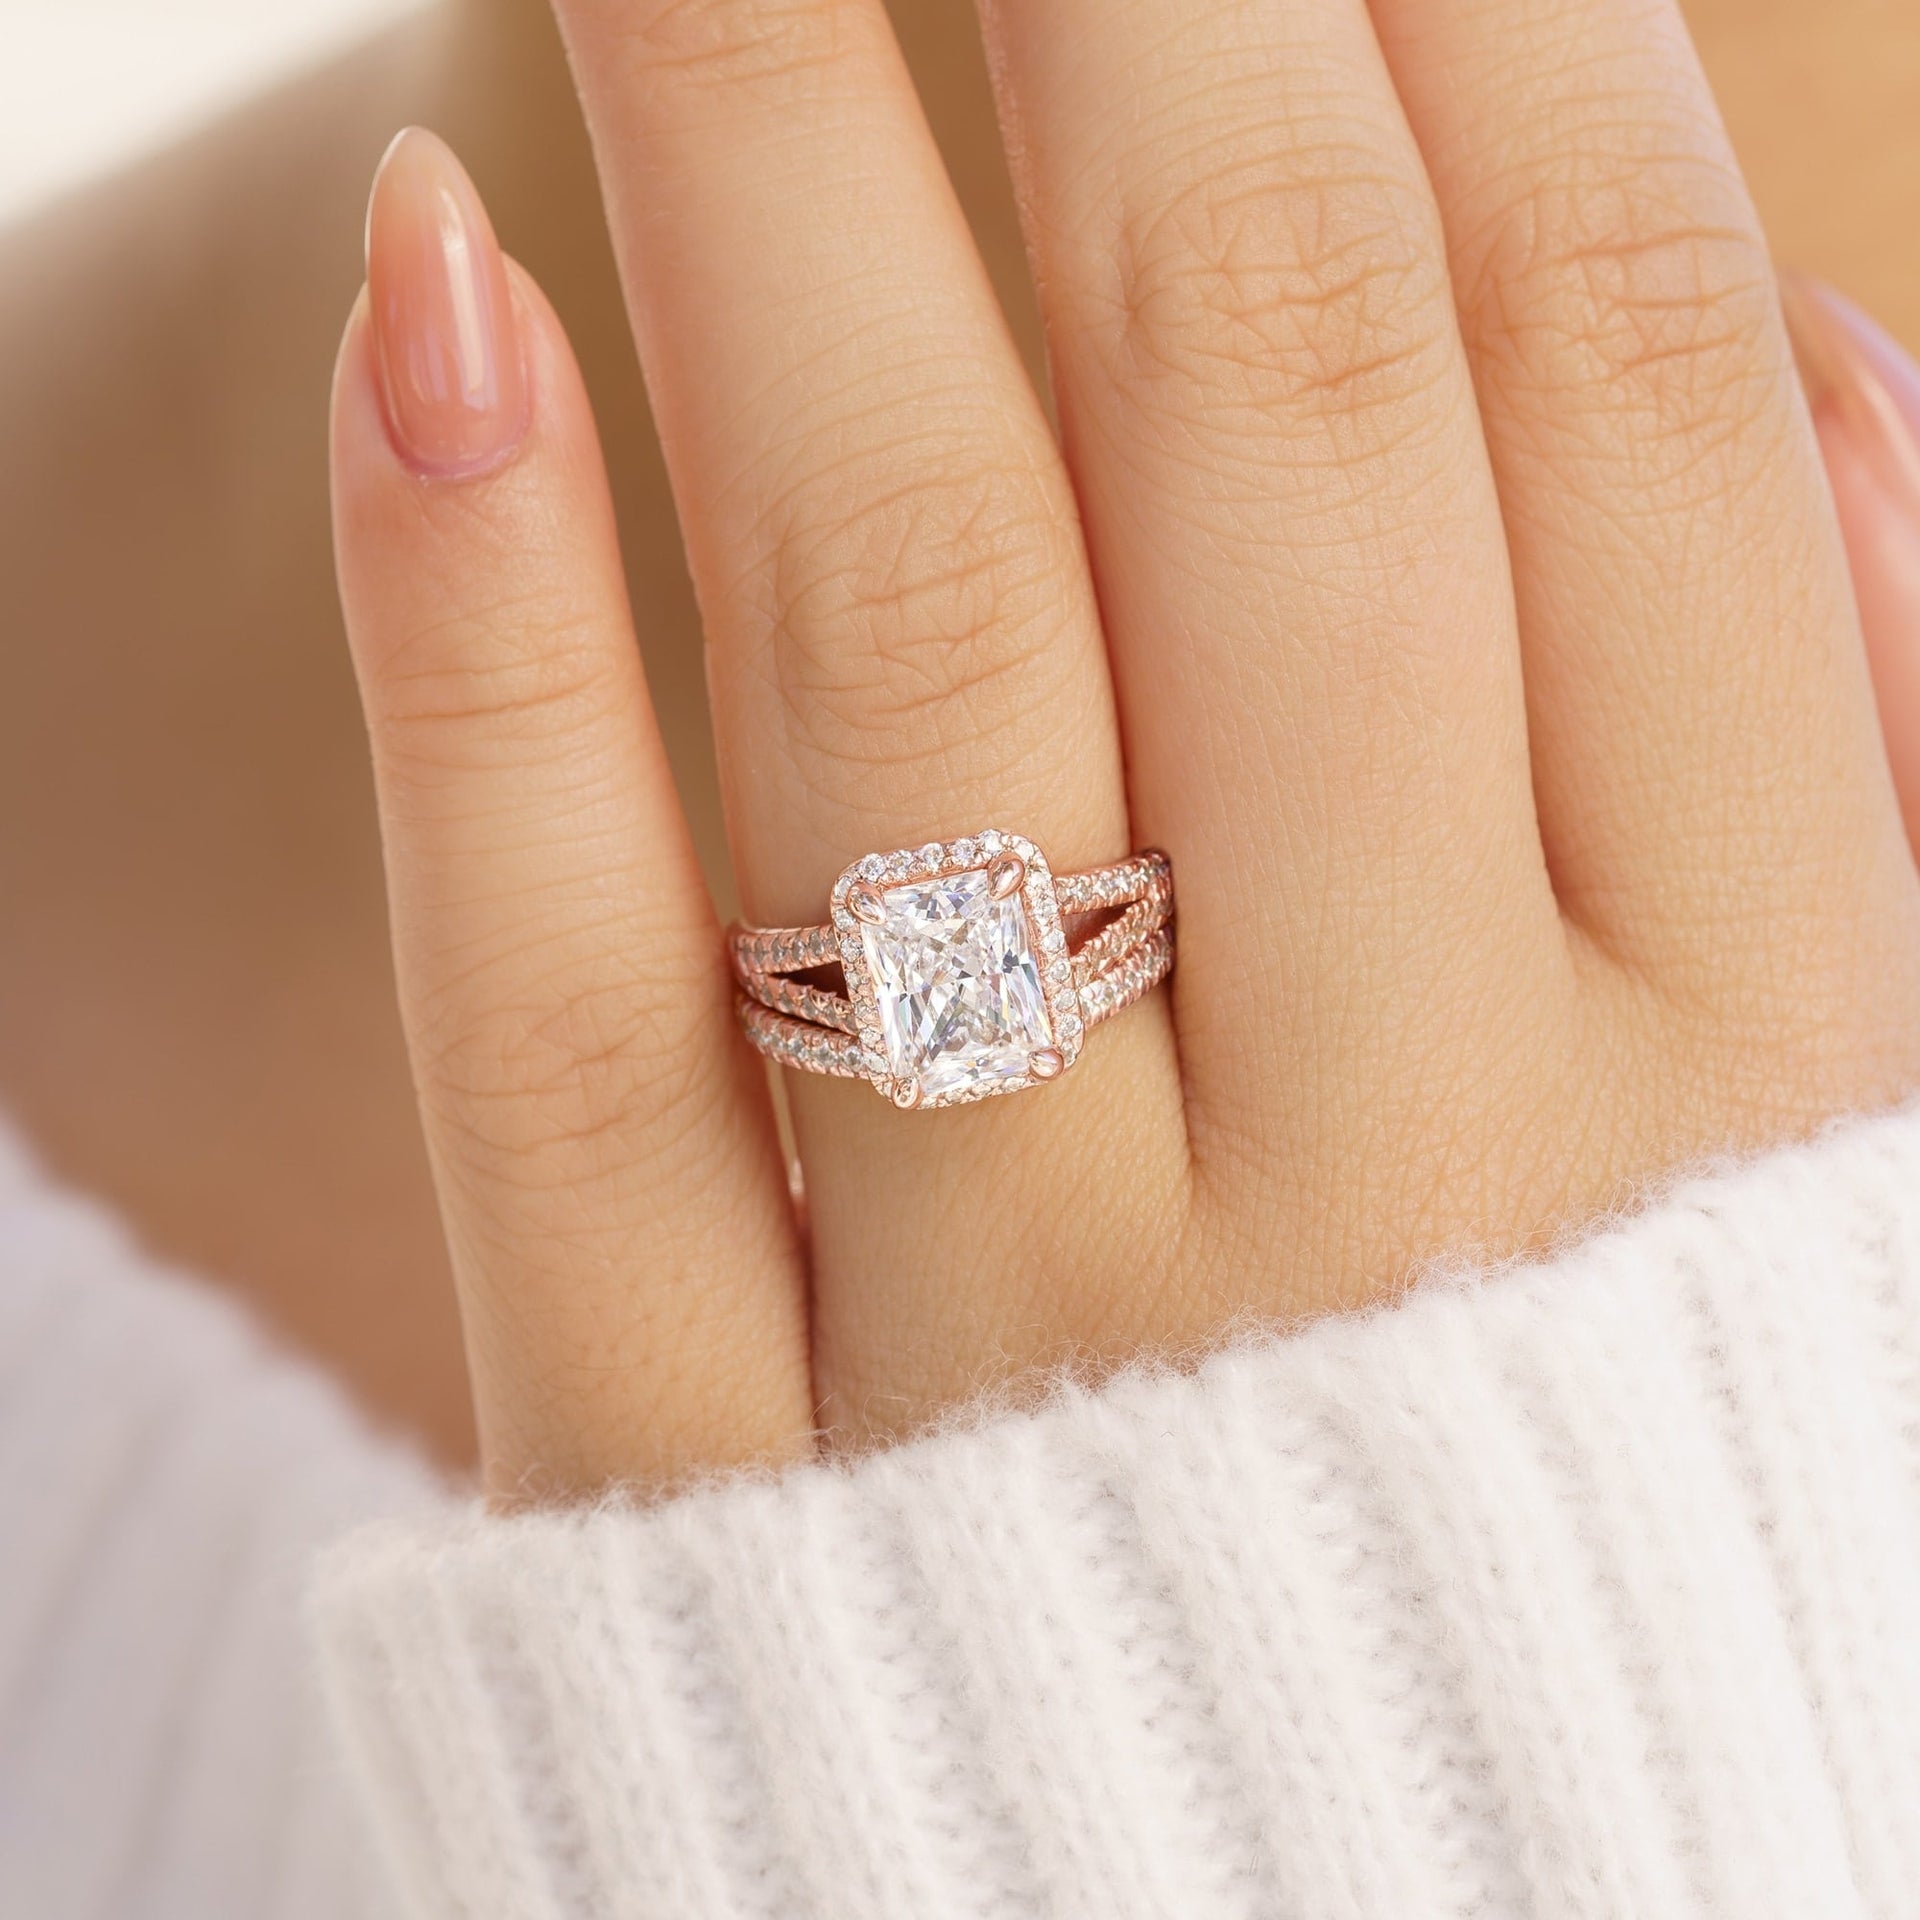 classic rose gold wedding ring set with 3.5 carat radiant cut center stone on female model with white knit sweater